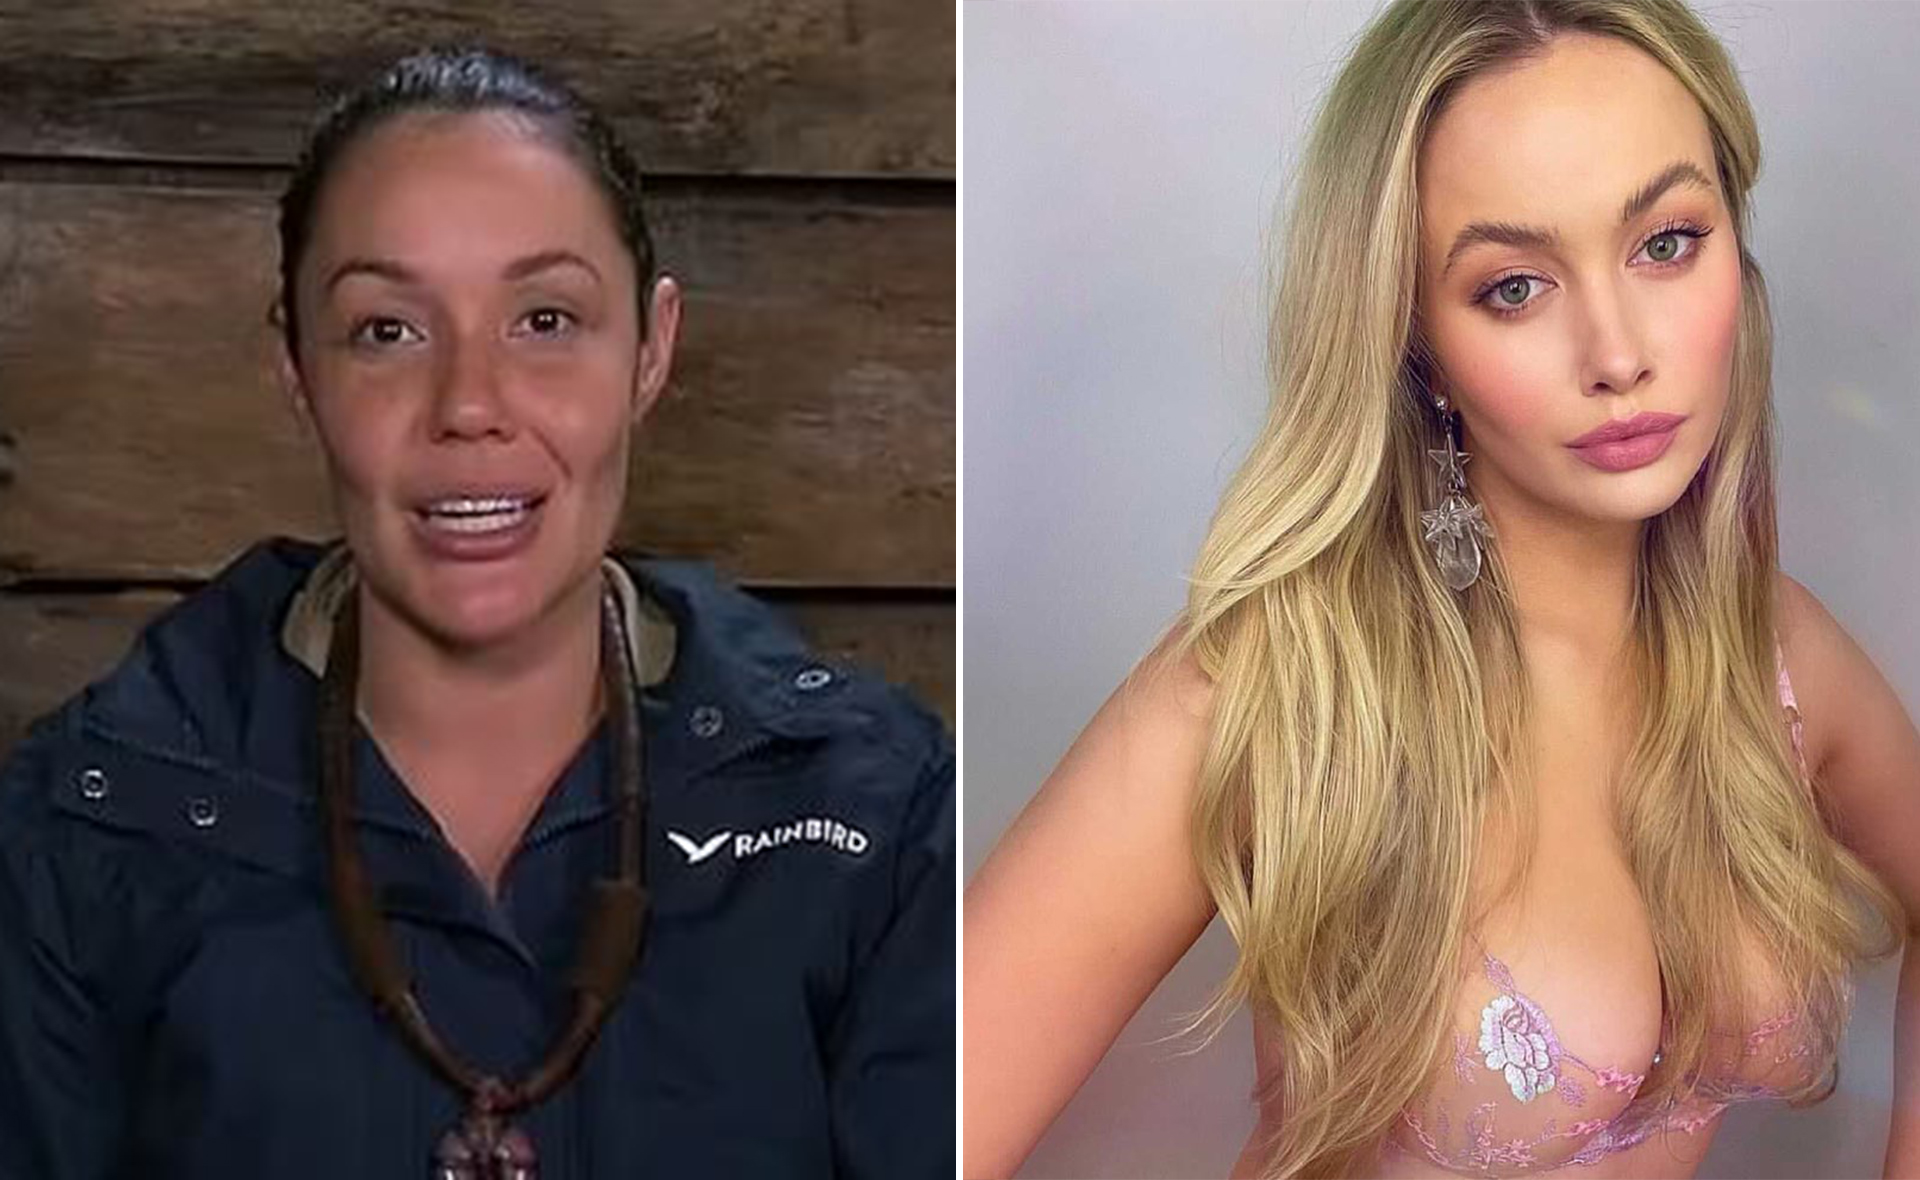 Why Simone Holtznagel slammed I’m a Celeb star Davina Rankin for saying she’s the “most trolled person in Australia”